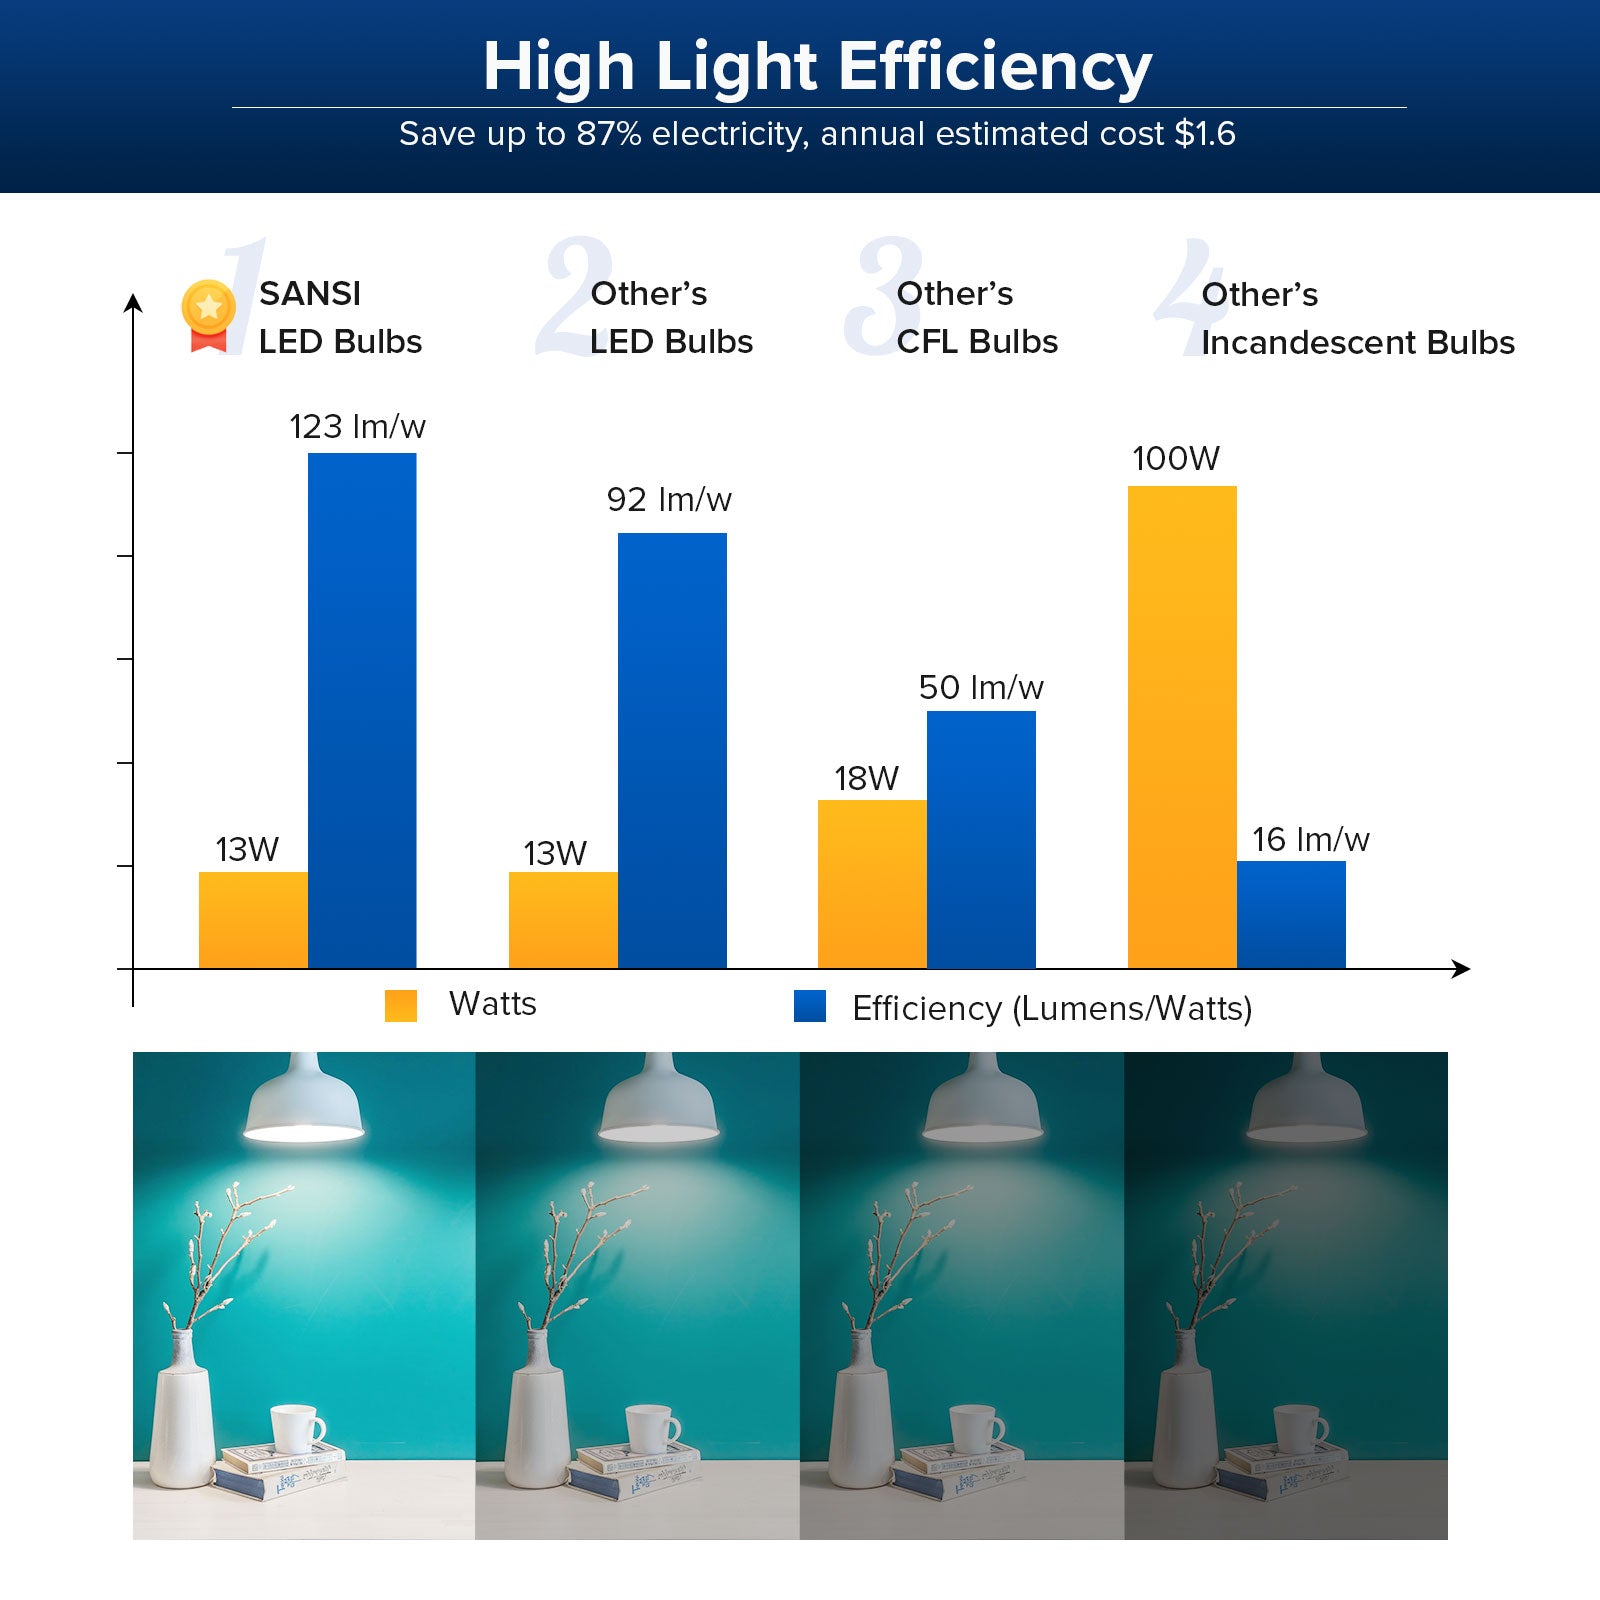 A19 13W LED Light BulbUpgraded A19 13W led light bulb with energy efficient for bedroom, high light efficiency, save up to 87% electricity, annual estimated cost $1.6